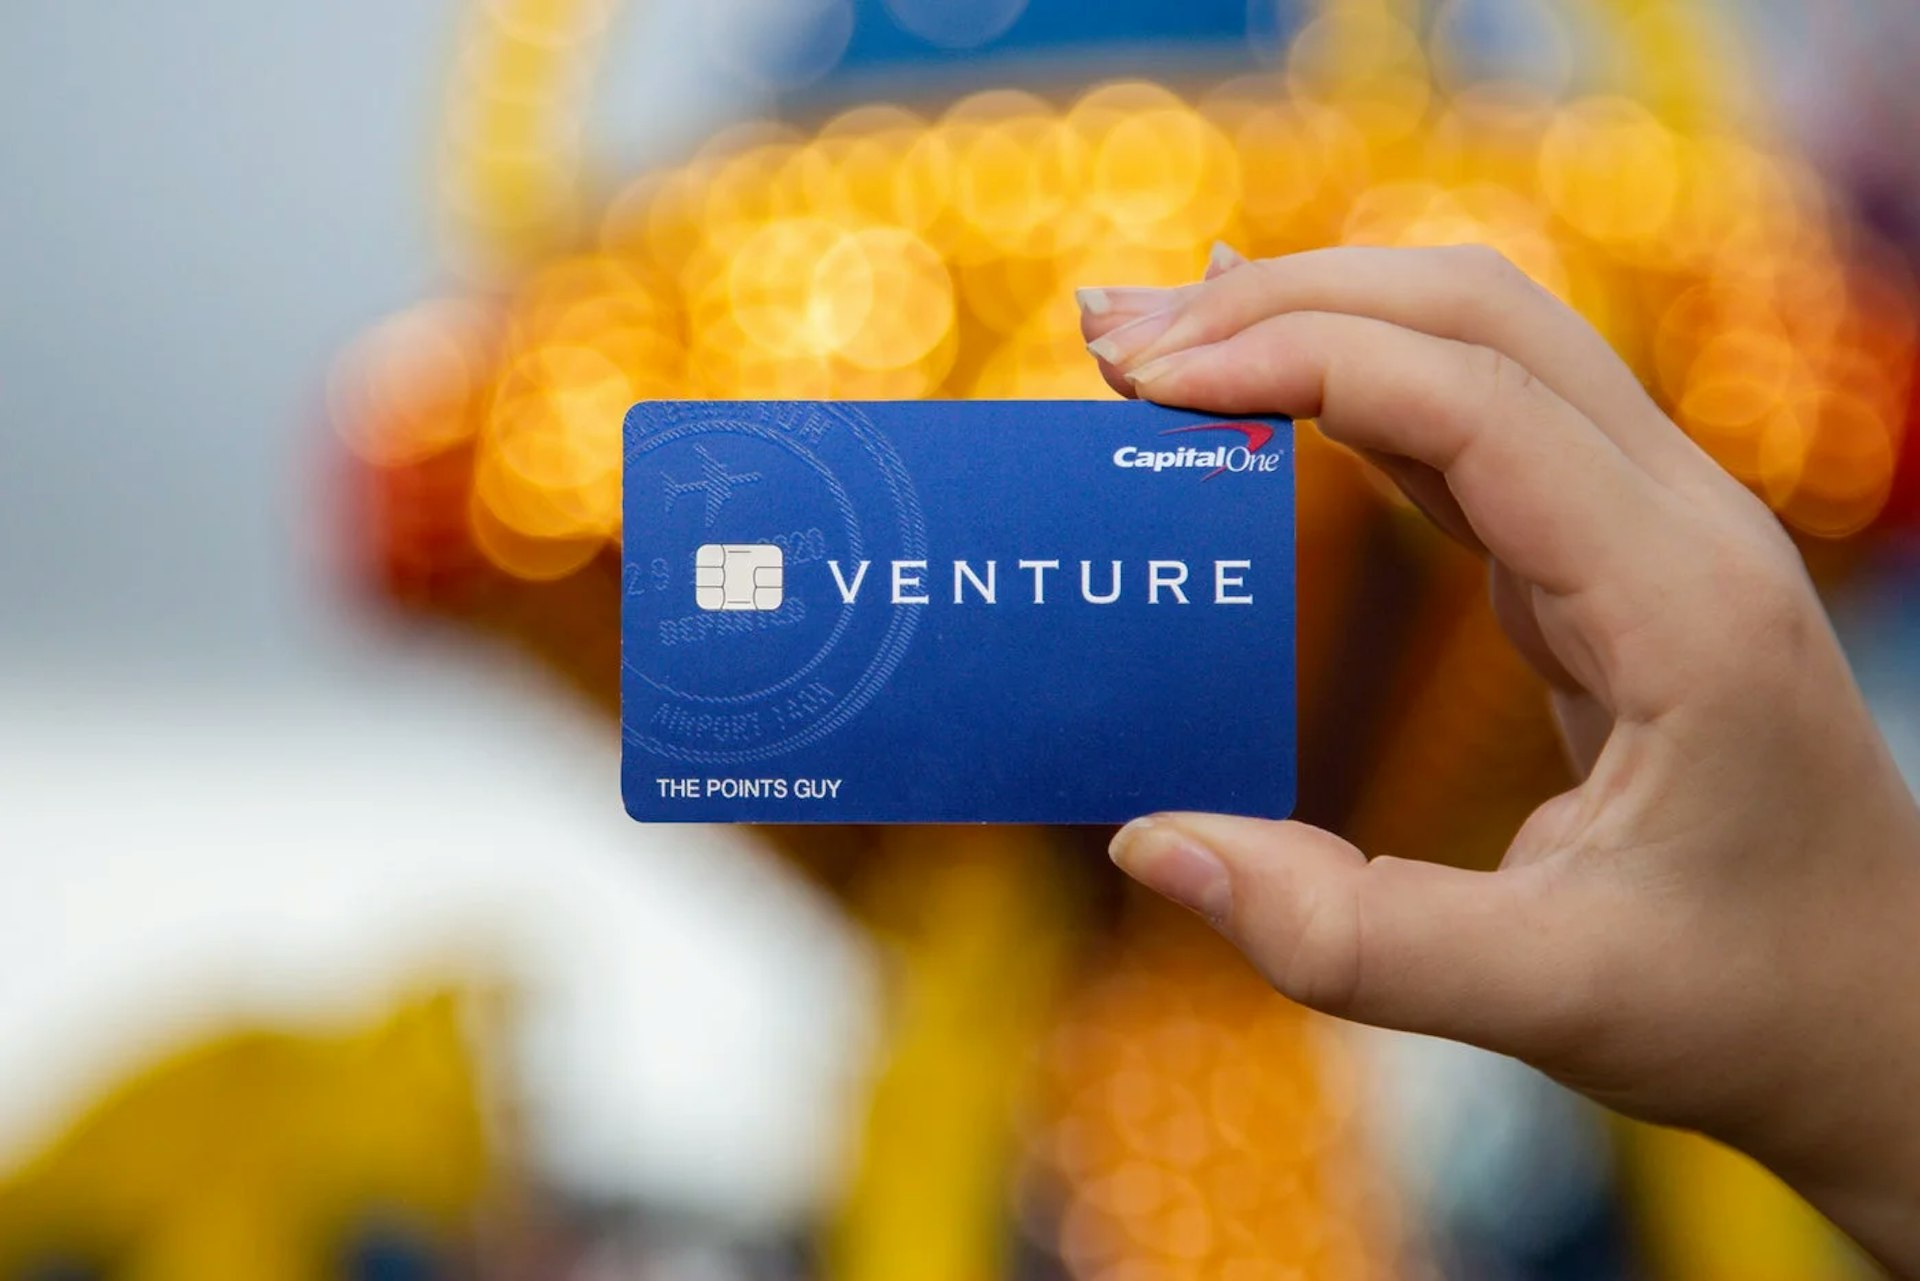 The Capital One Venture card